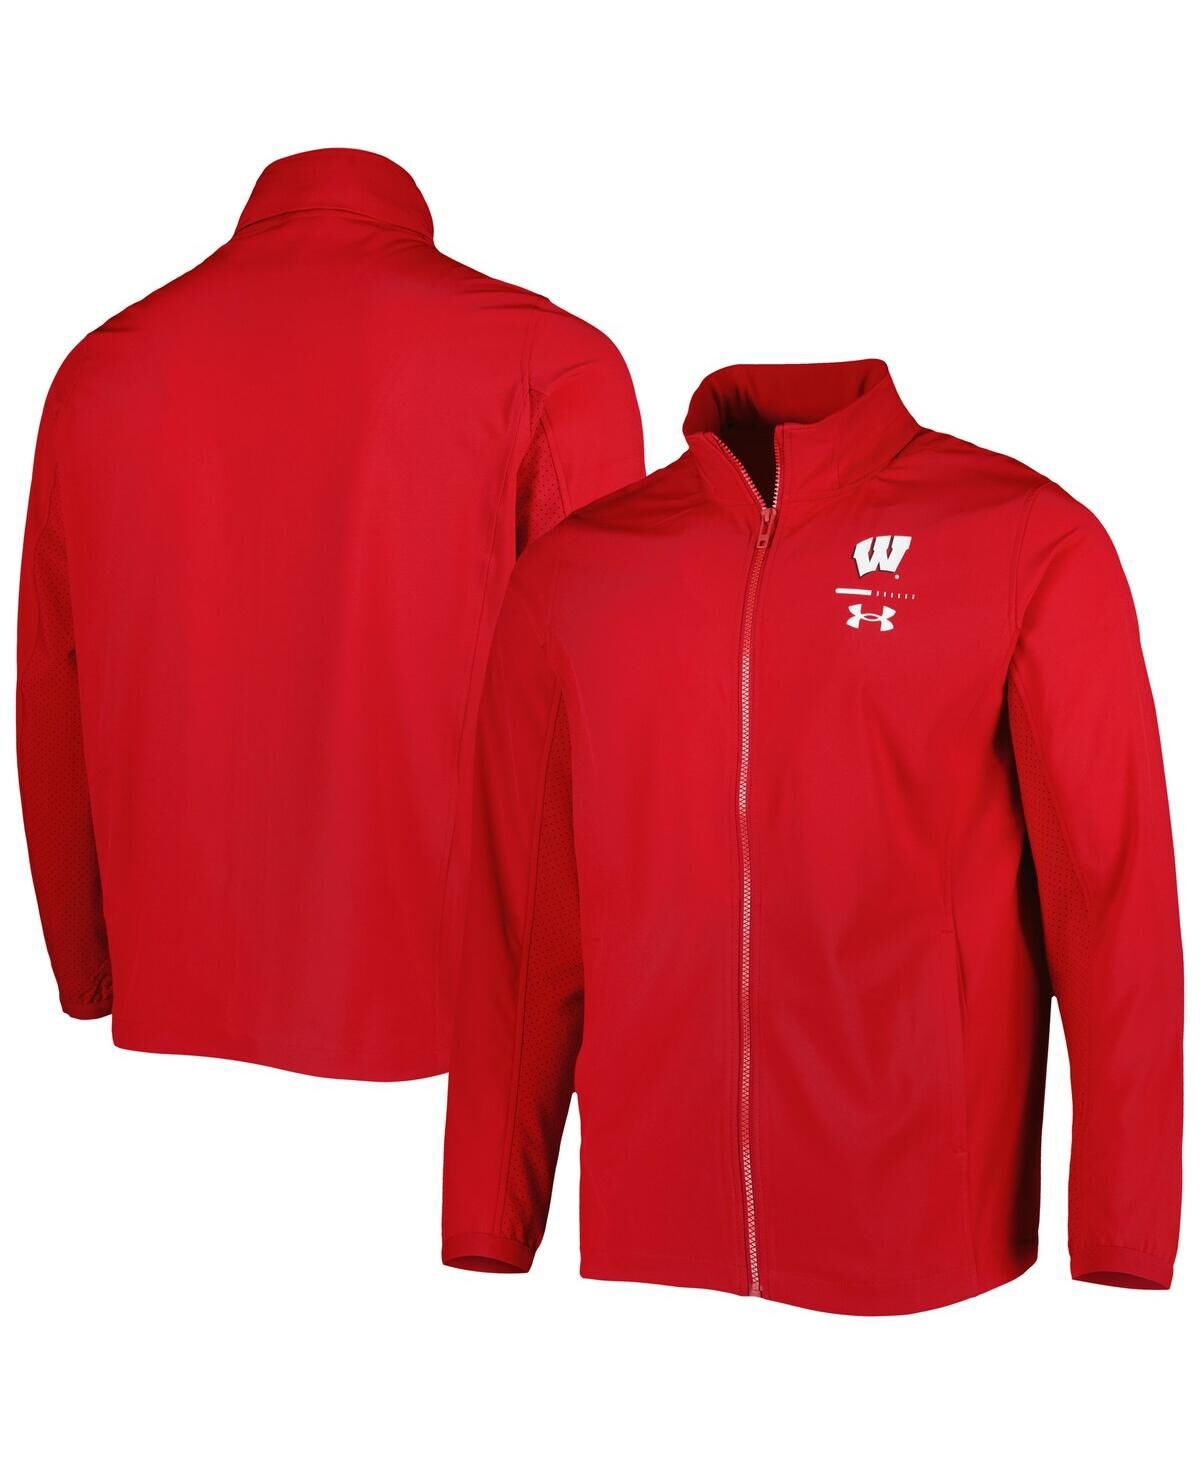 Under Armour Men's Under Armour Red Wisconsin Badgers Squad 3.0 Full-Zip Jacket - Red